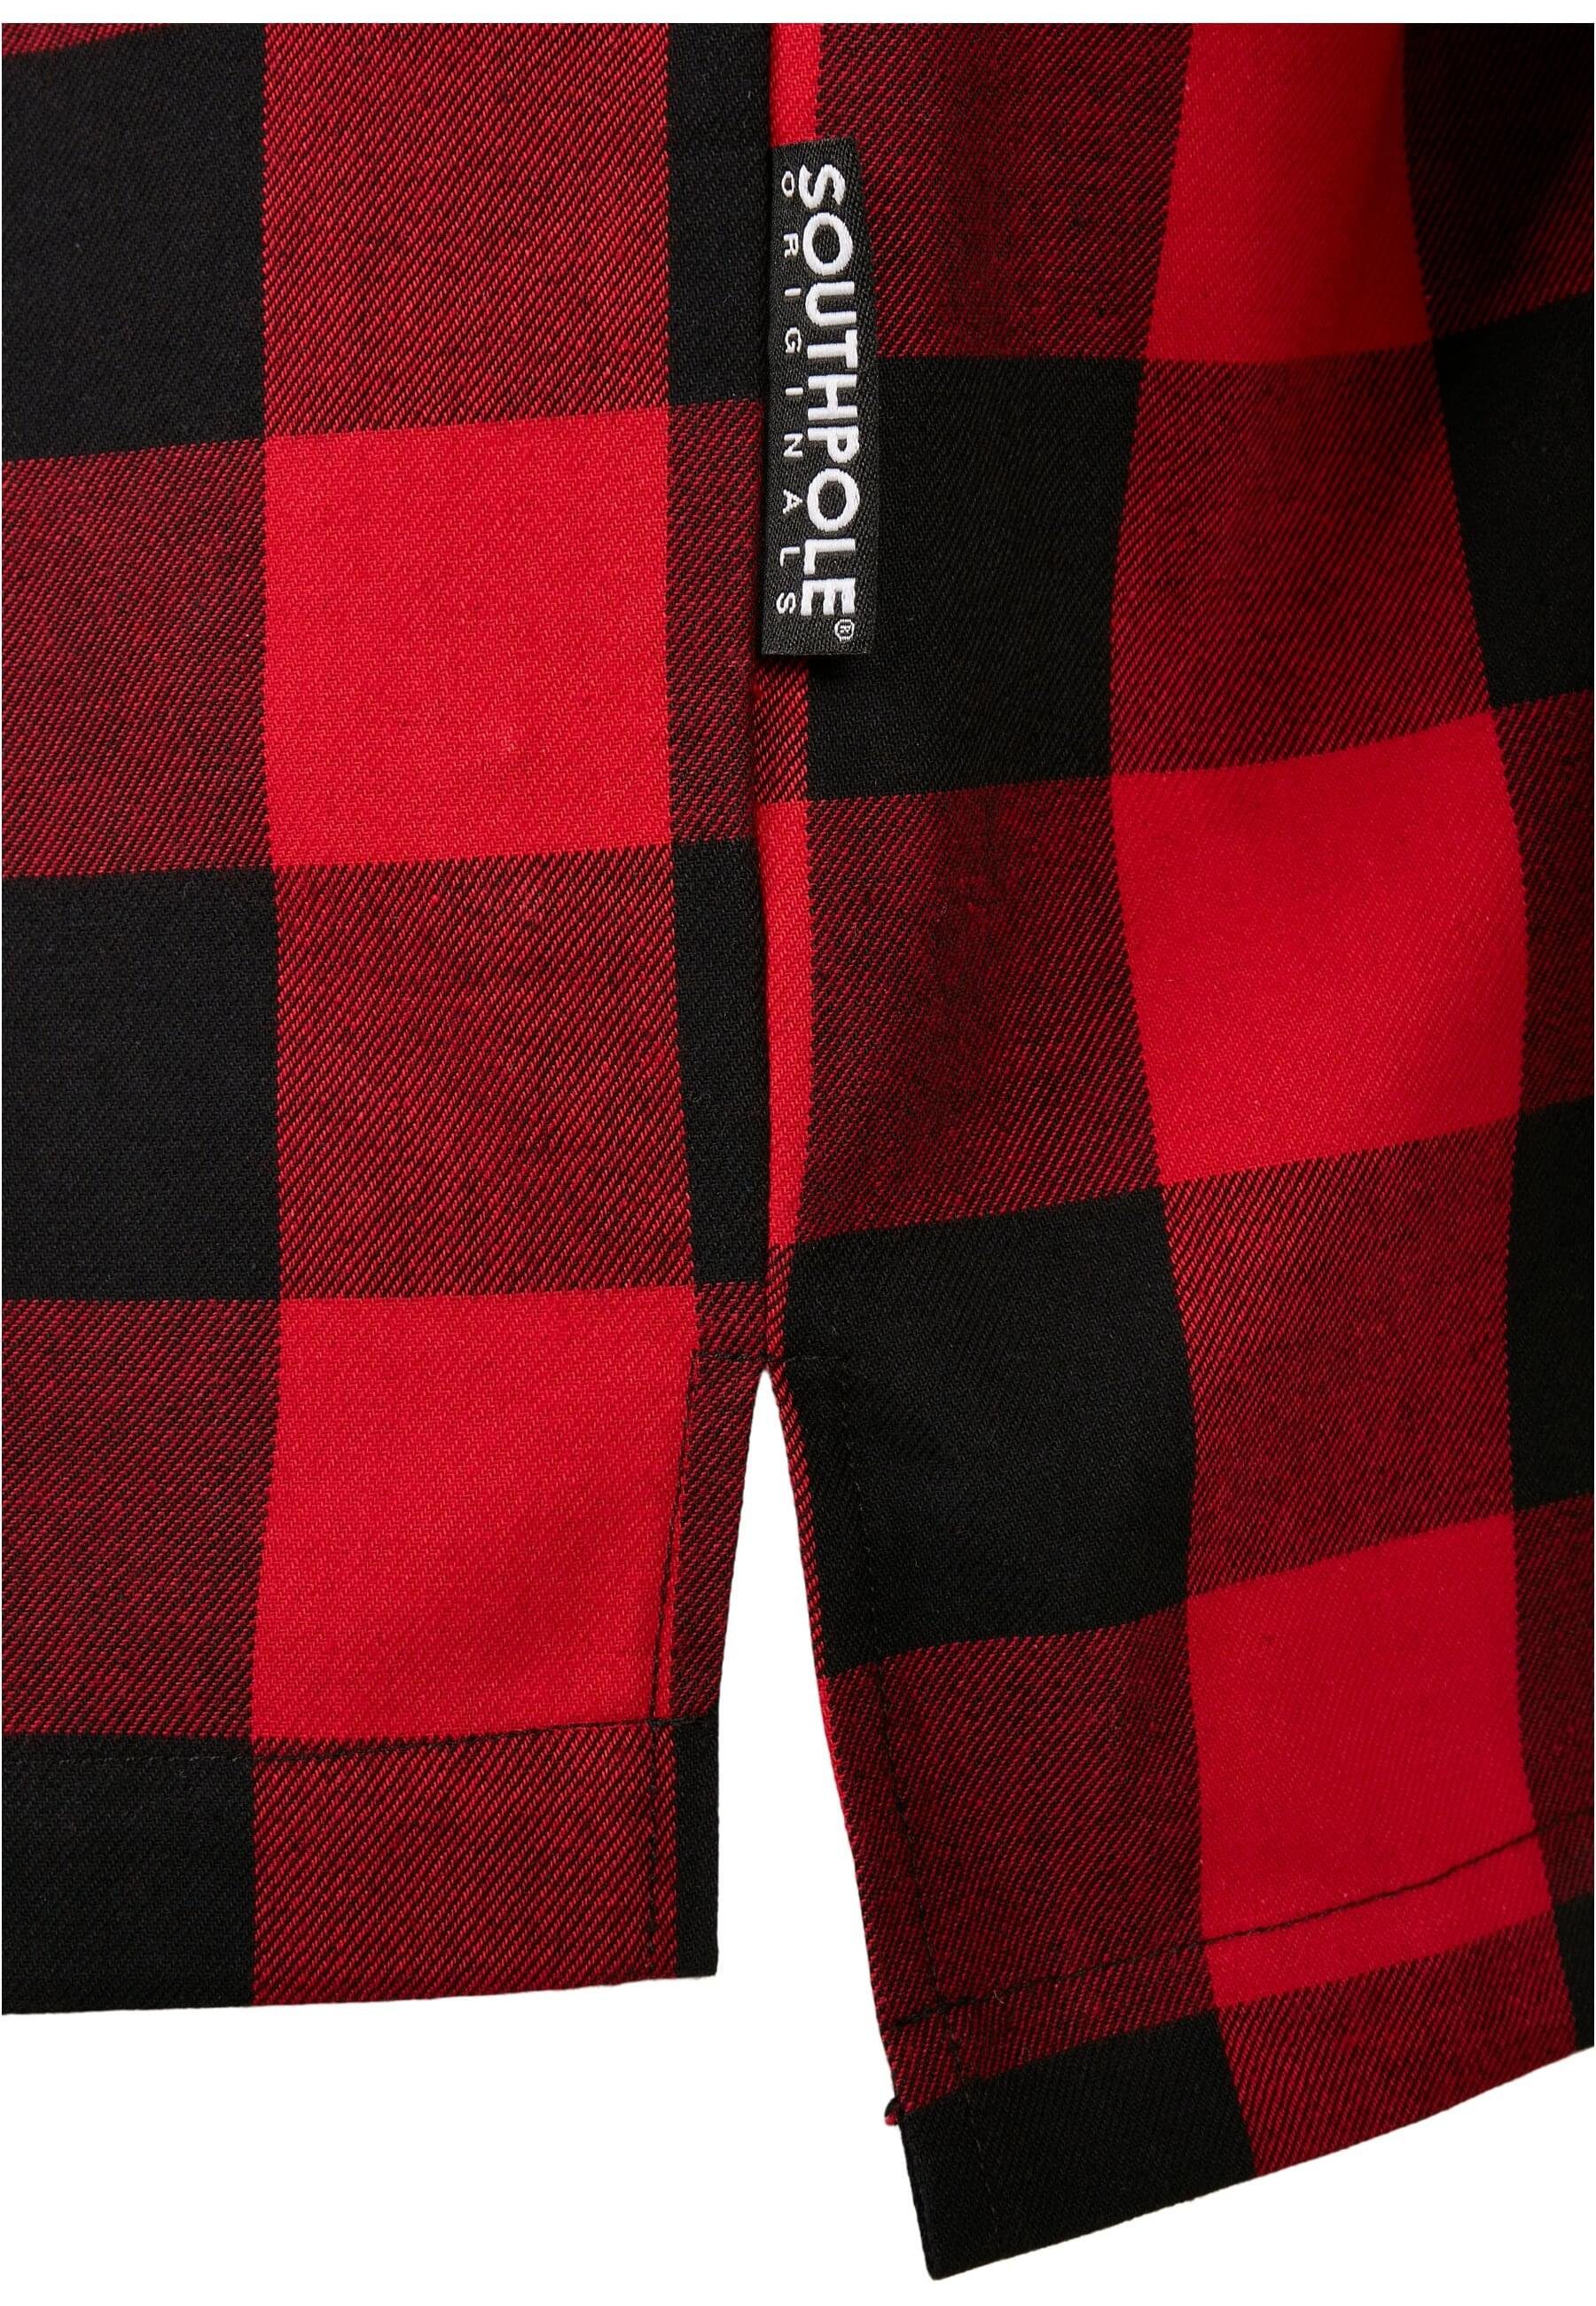 Southpole Shirt Herren red Southpole Flannel (1-tlg) Langarmshirt Check